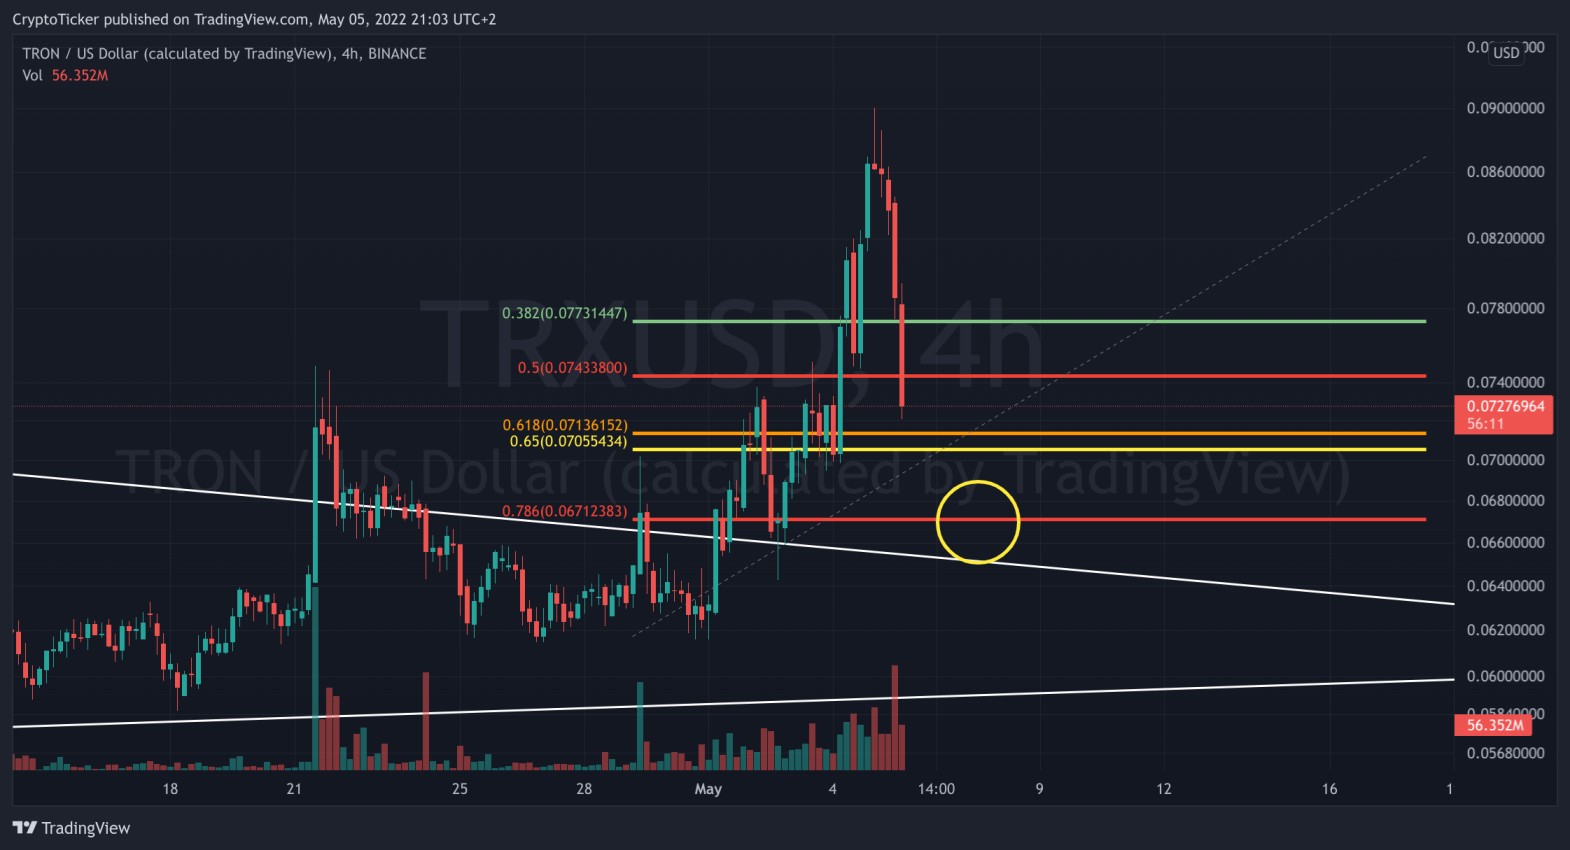 TRX/USD 4-hours chart showing the retracement of TRX